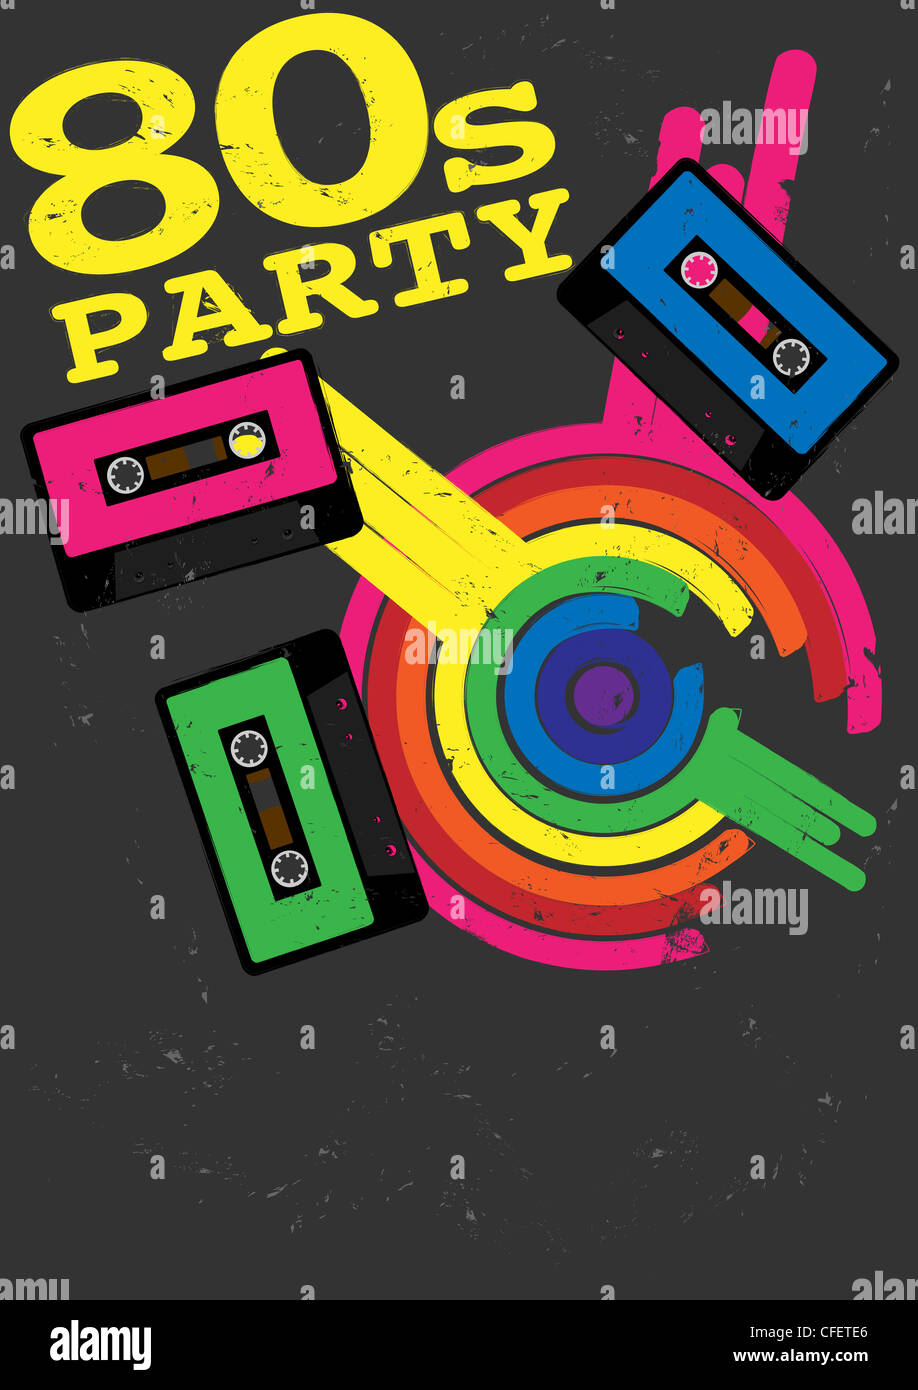 Retro Poster - 80s Party Flyer With Audio Cassette Tape Stock Photo